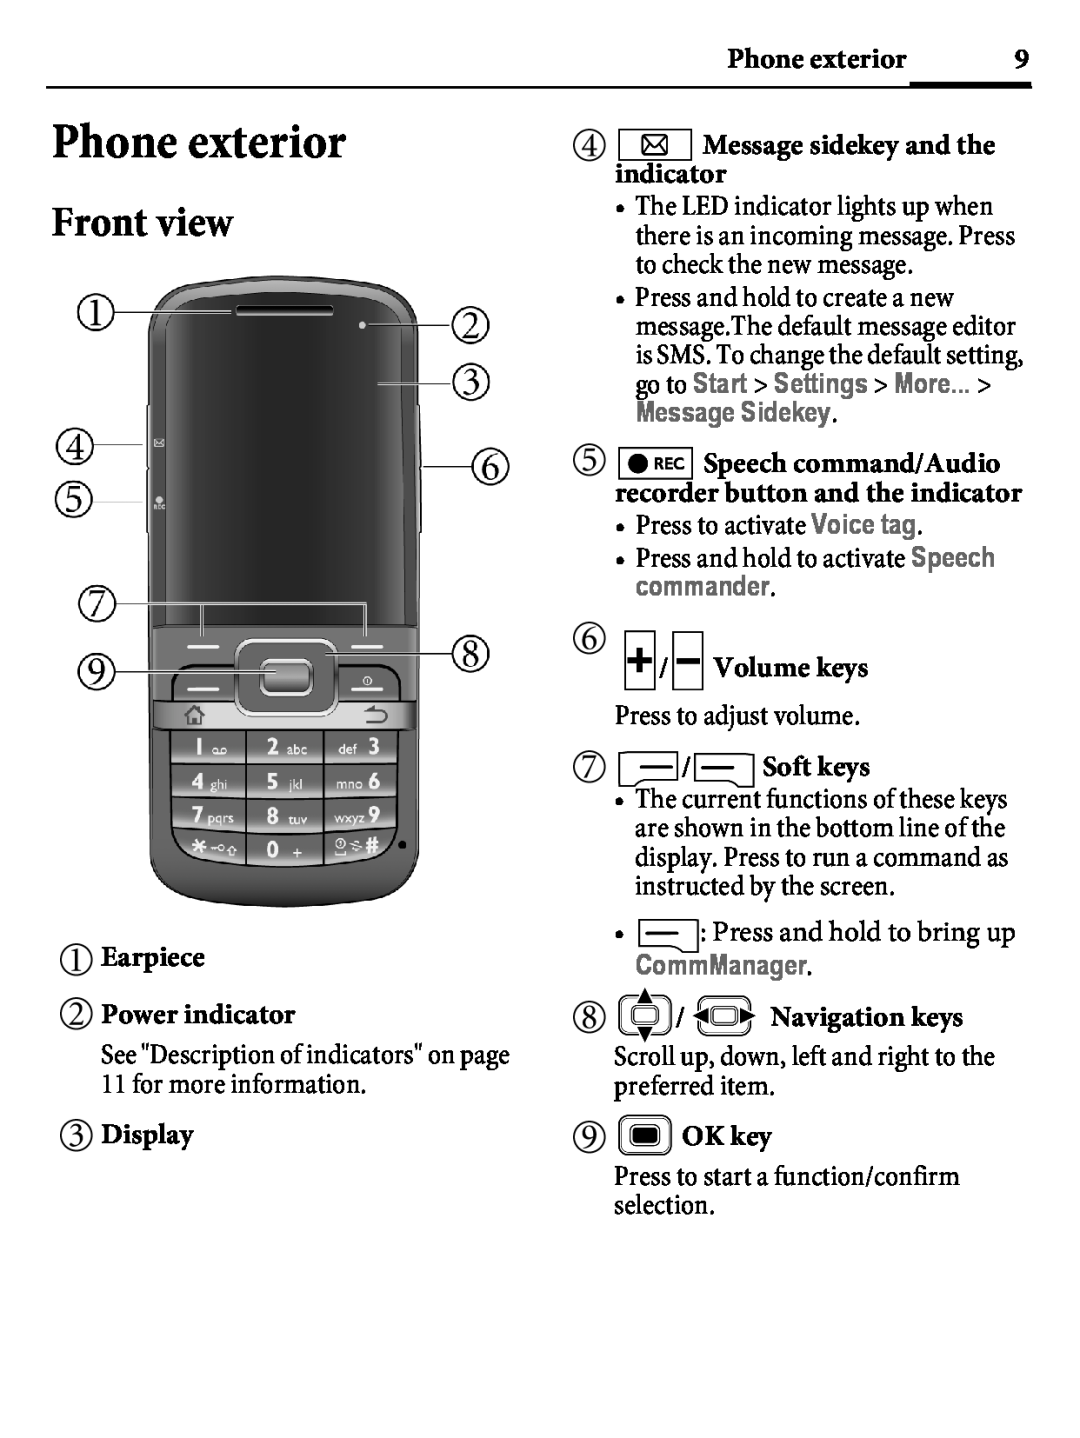 Kyocera E4000 Phone exterior, Front view, Earpiece Power indicator, Display, Message sidekey and the indicator, Soft keys 